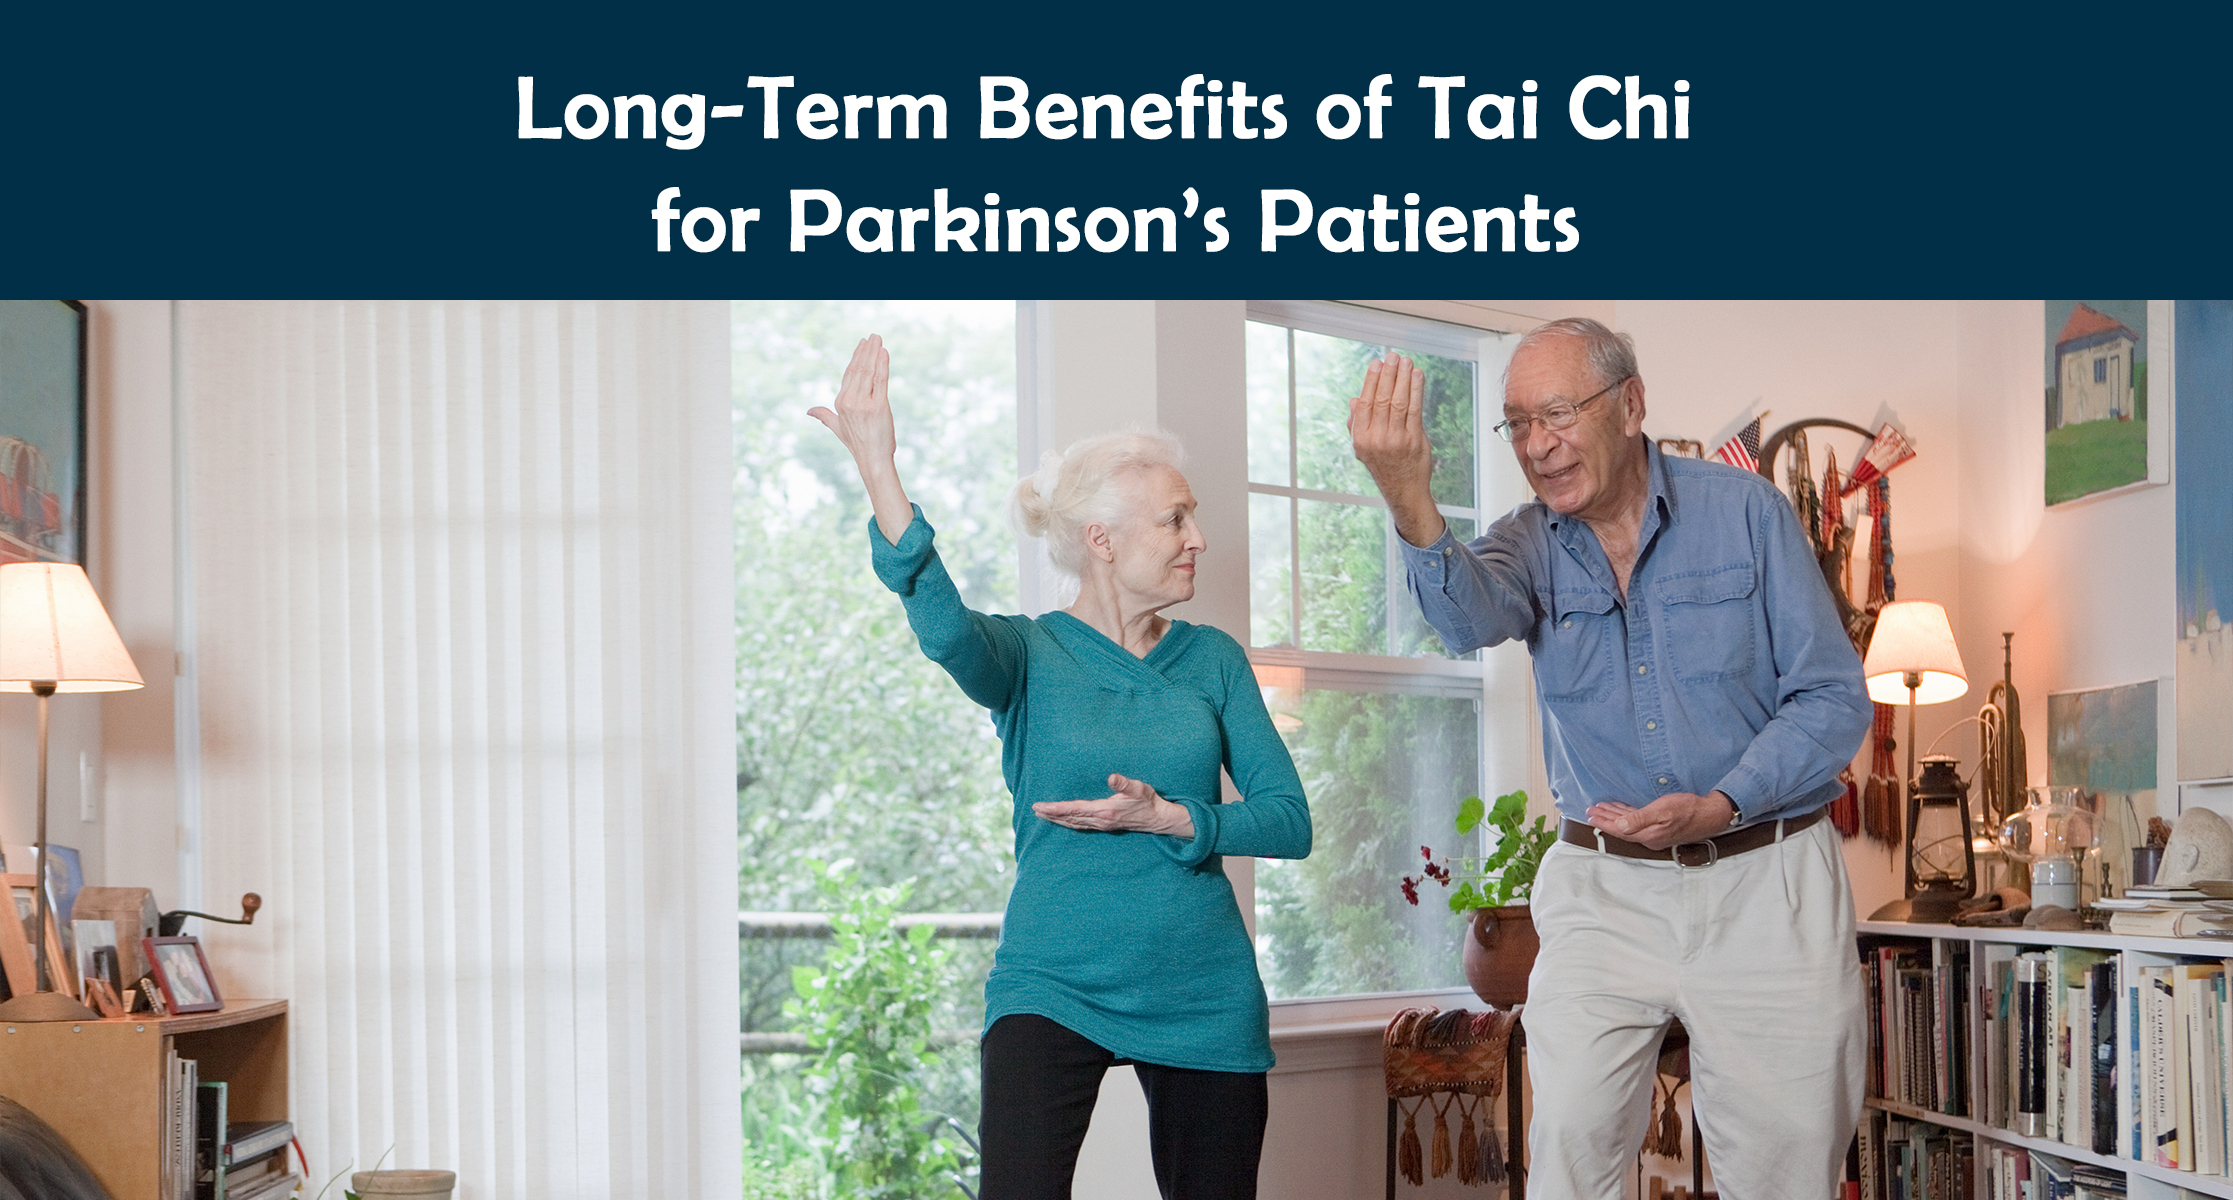 Long-Term Benefits of Tai Chi for Parkinson’s Patients